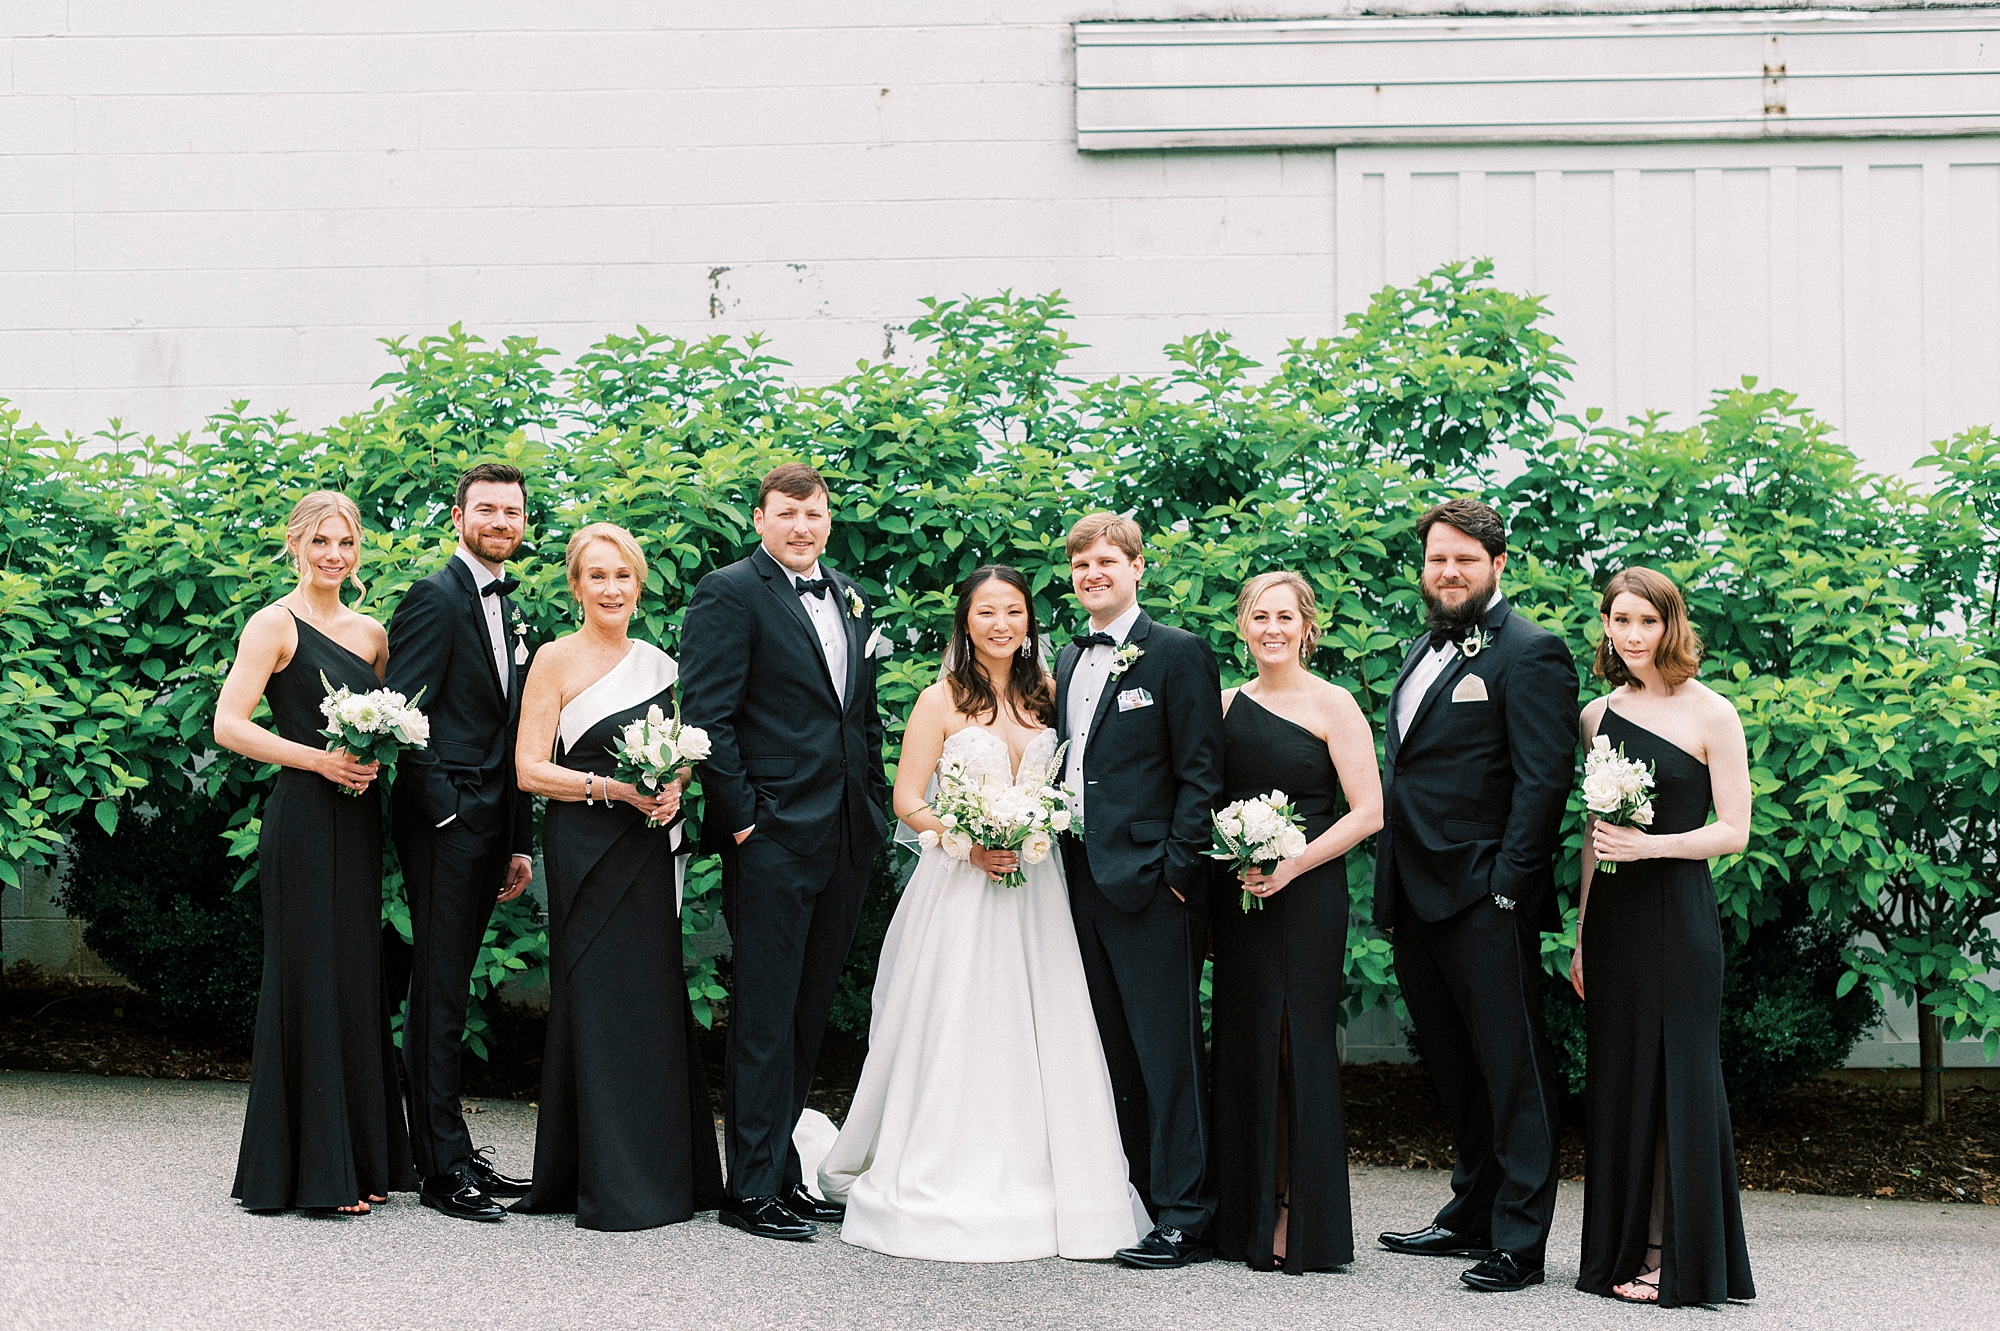 bride and groom stand with wedding party in black dresses and suits